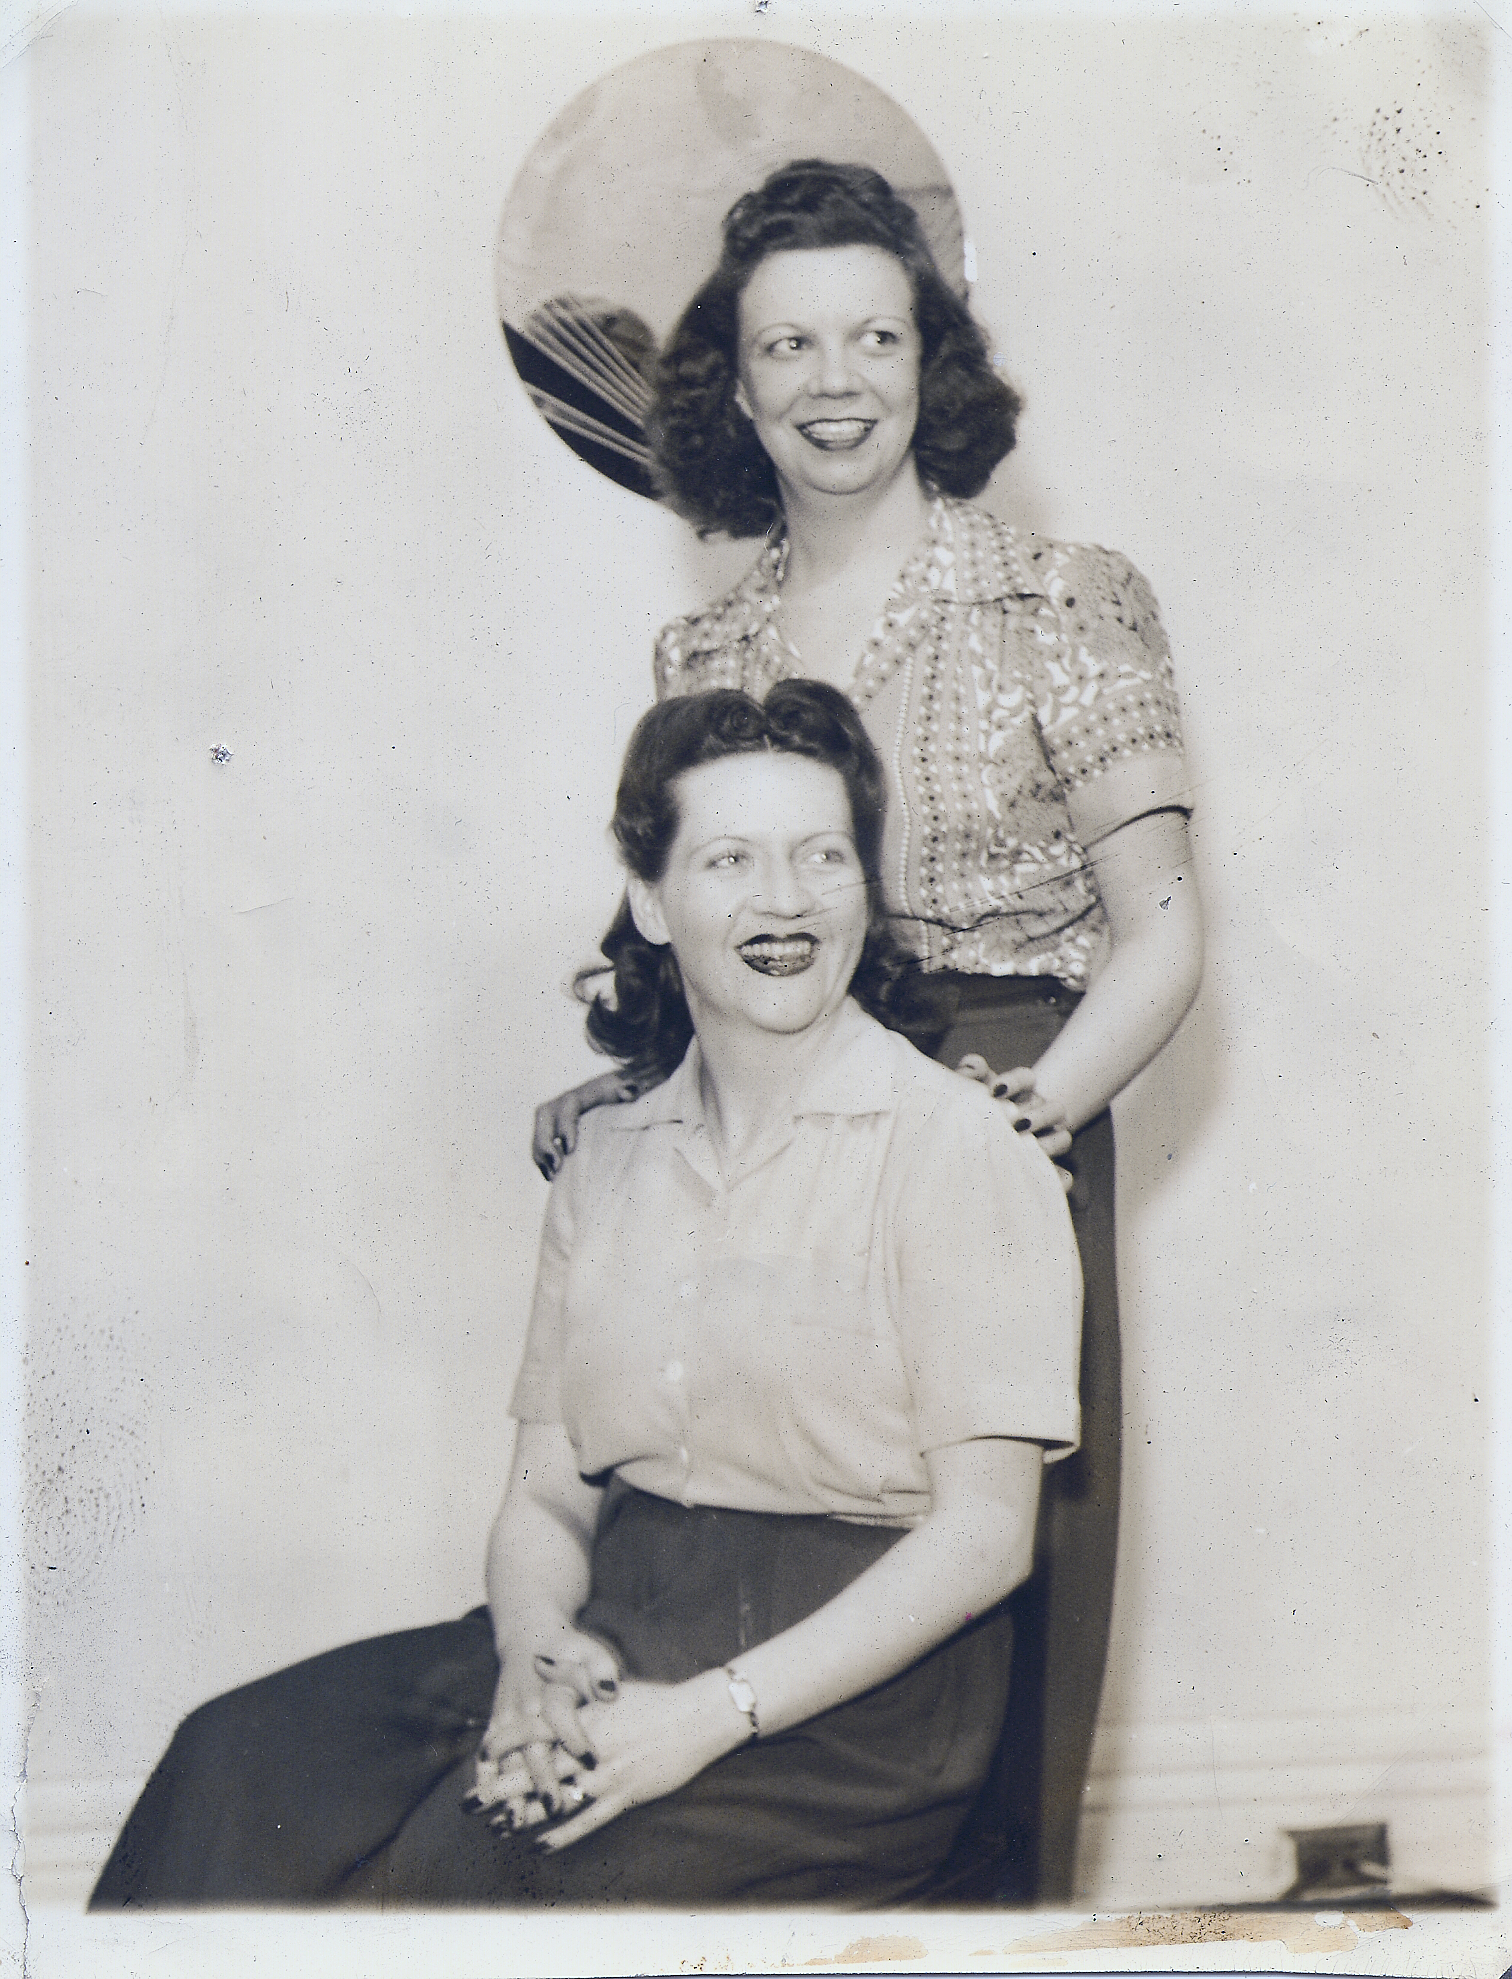 My mother (seated) and a good friend. Early to mid-1930s I believe.